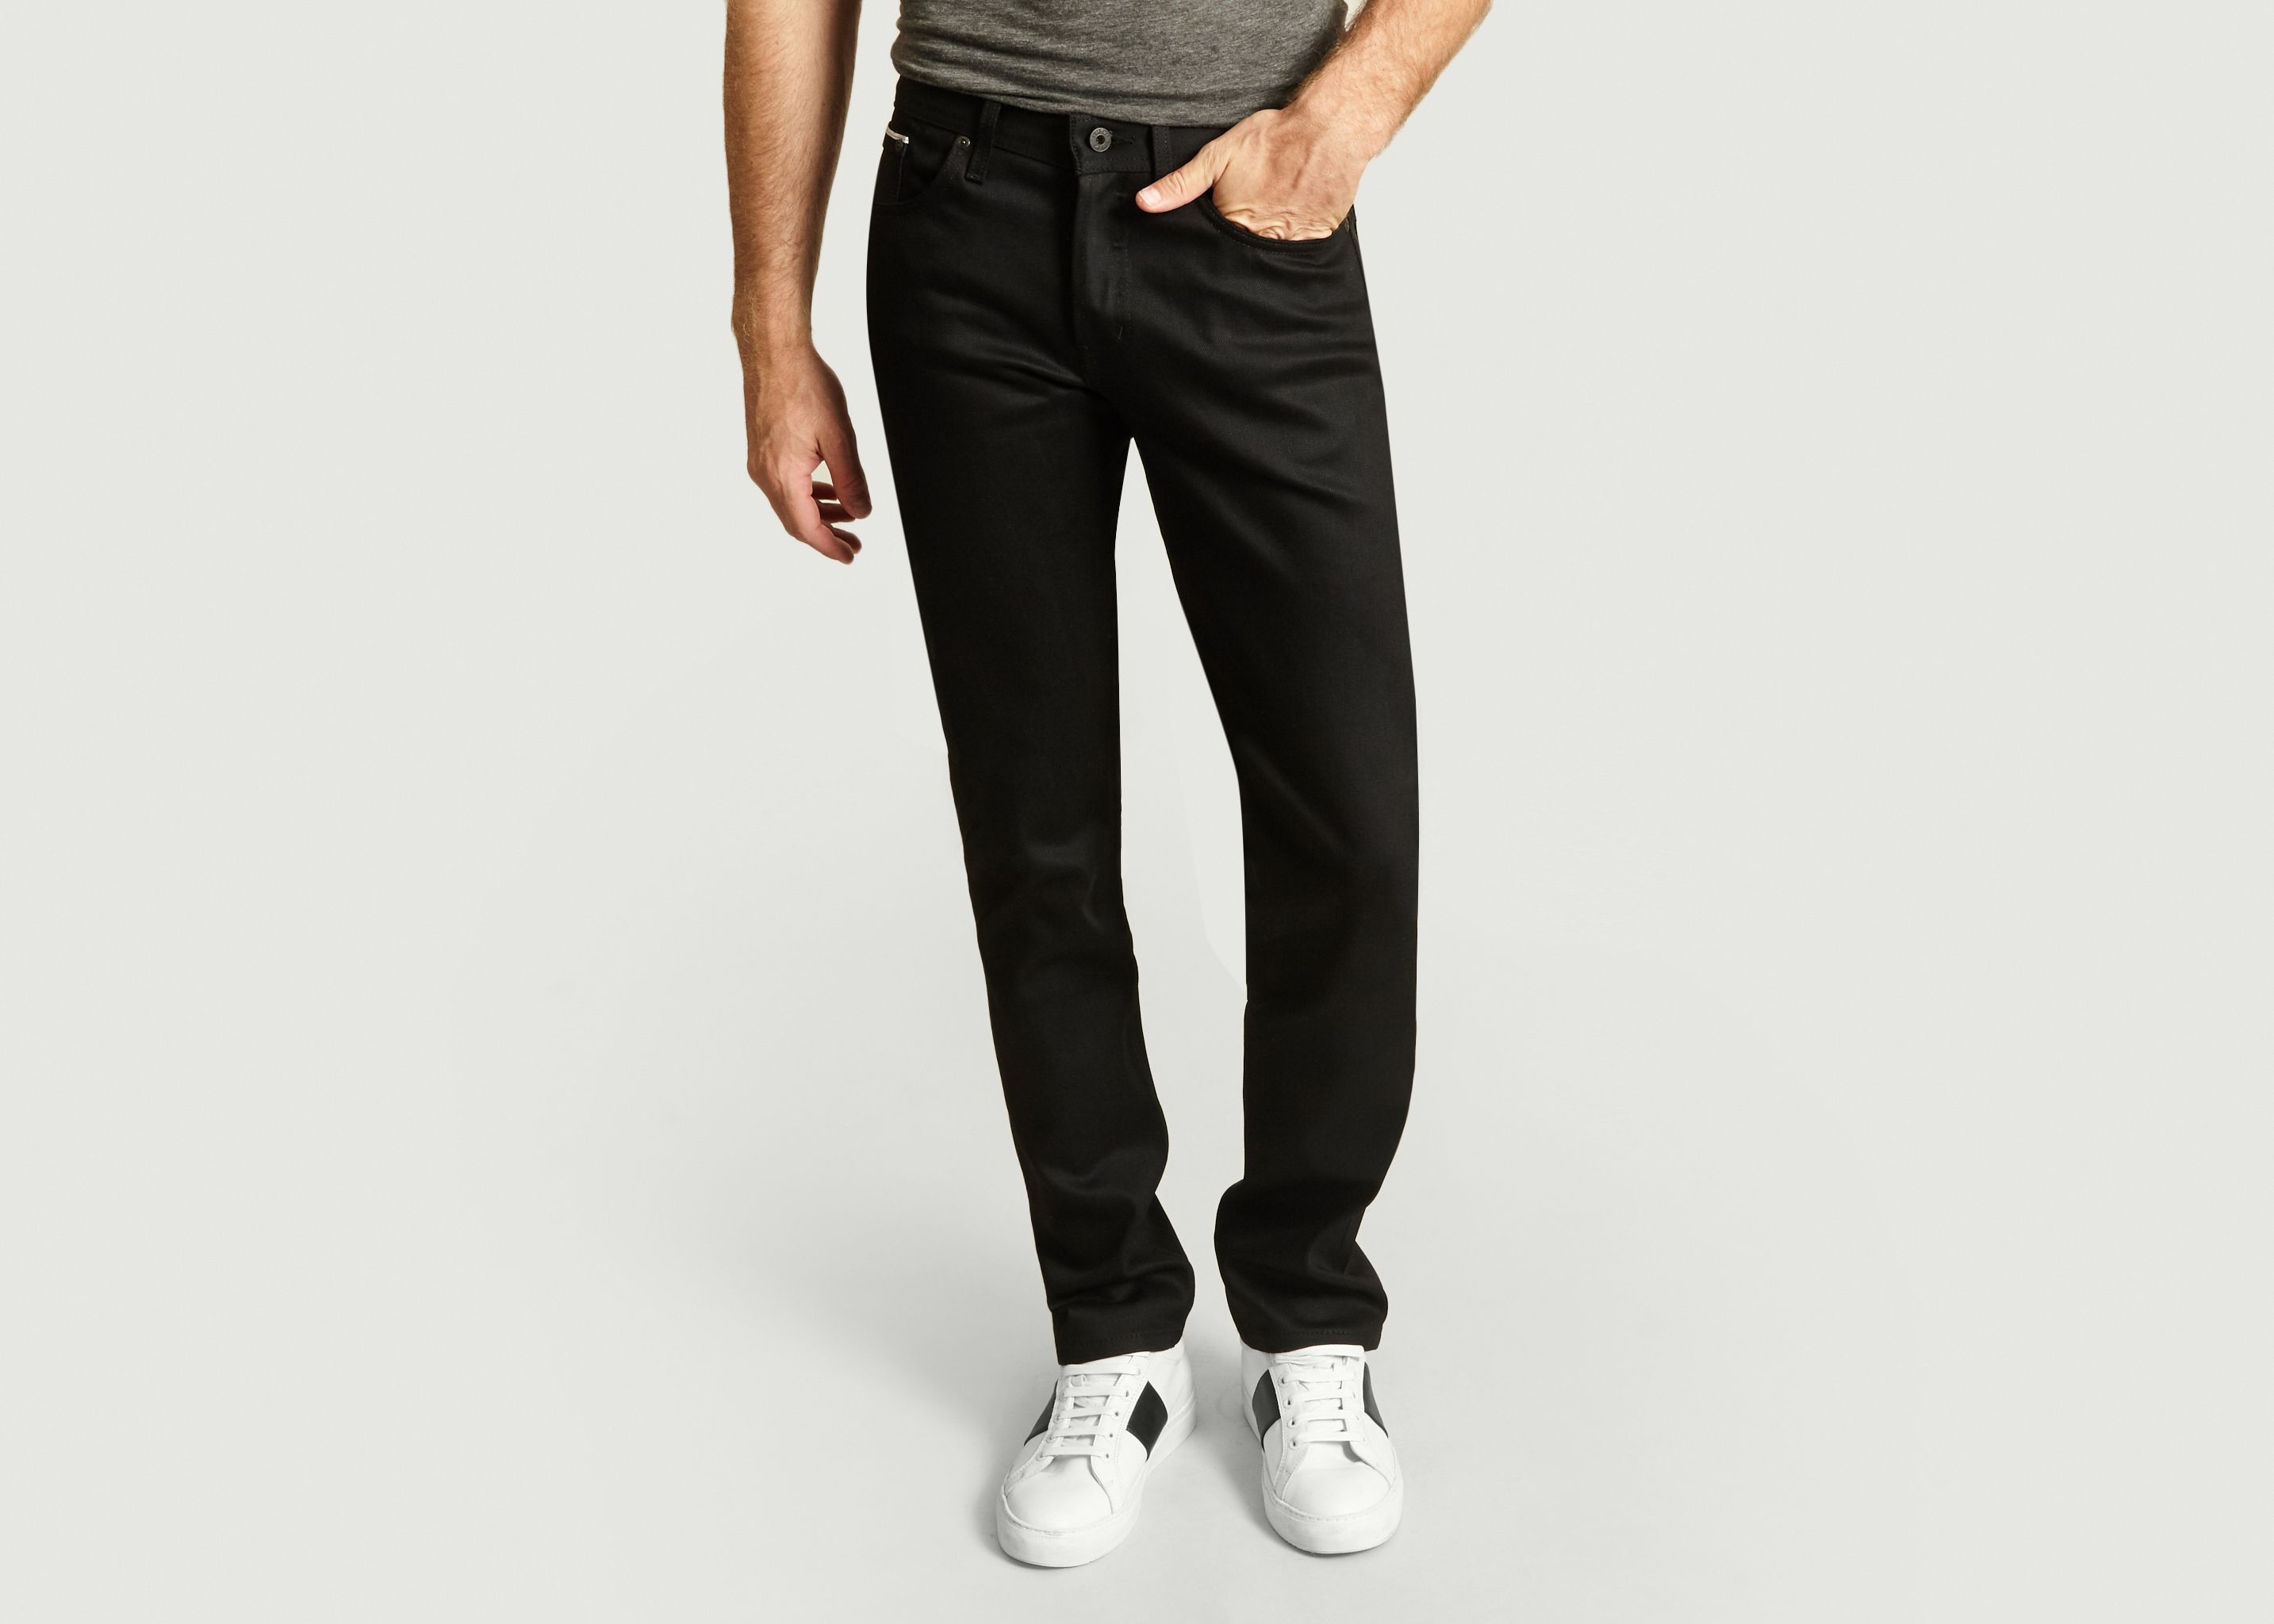 Jean Weird Guy Selvedge Cobra Stretch - Naked and Famous